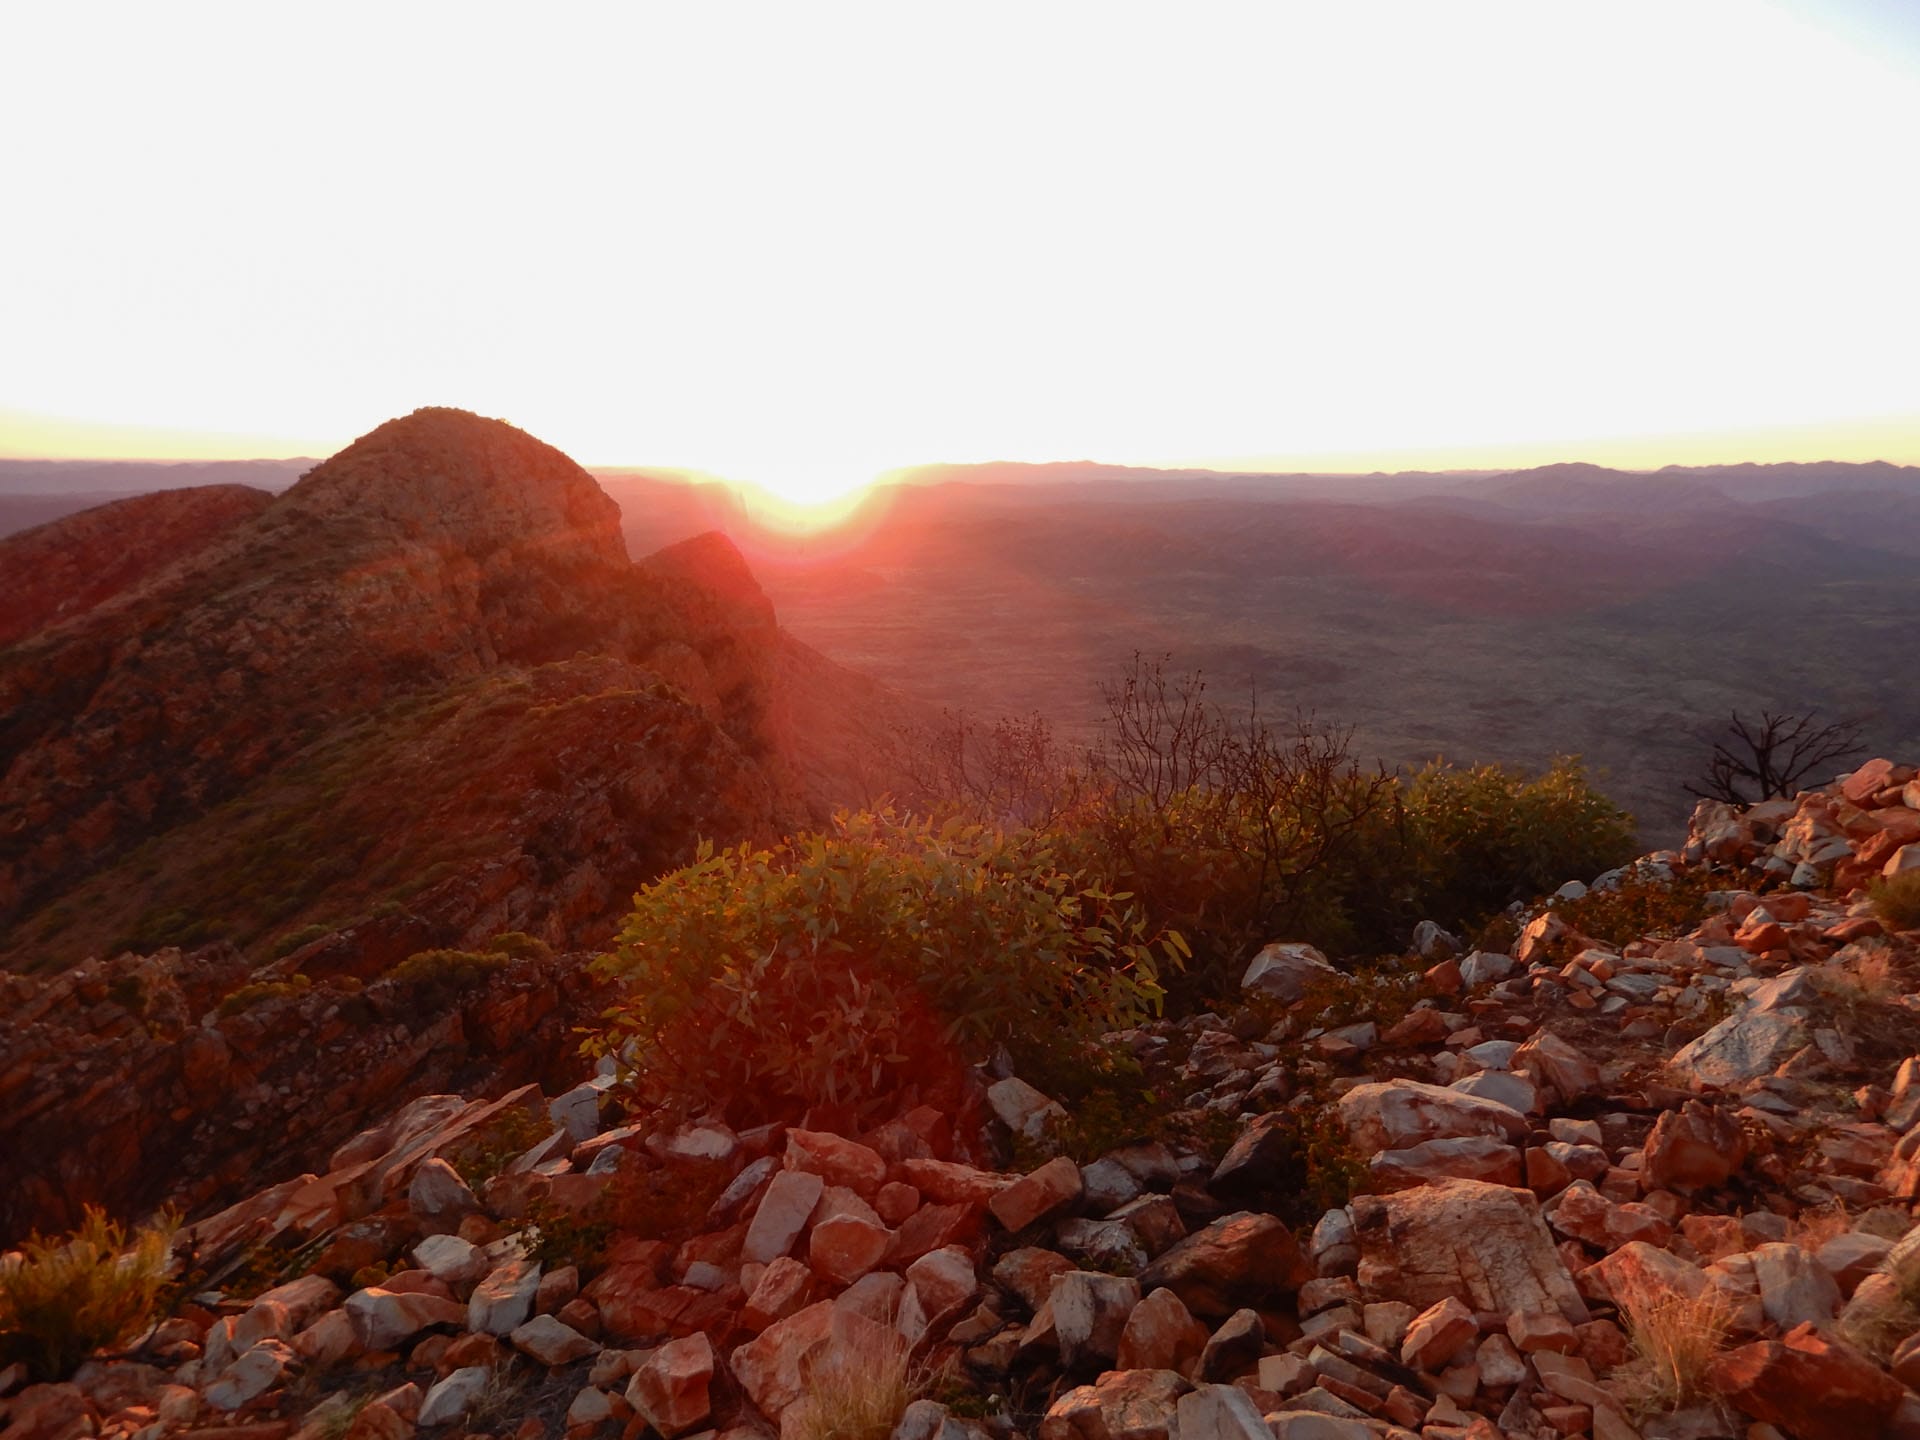 The ‘Big 3’ Hikes of the NT: How Do They Compare?, hiking, northern territory, larapinta trail, mountains, indigenous culture, multi-day hike, sun setting over the mountains in the larapinta trail